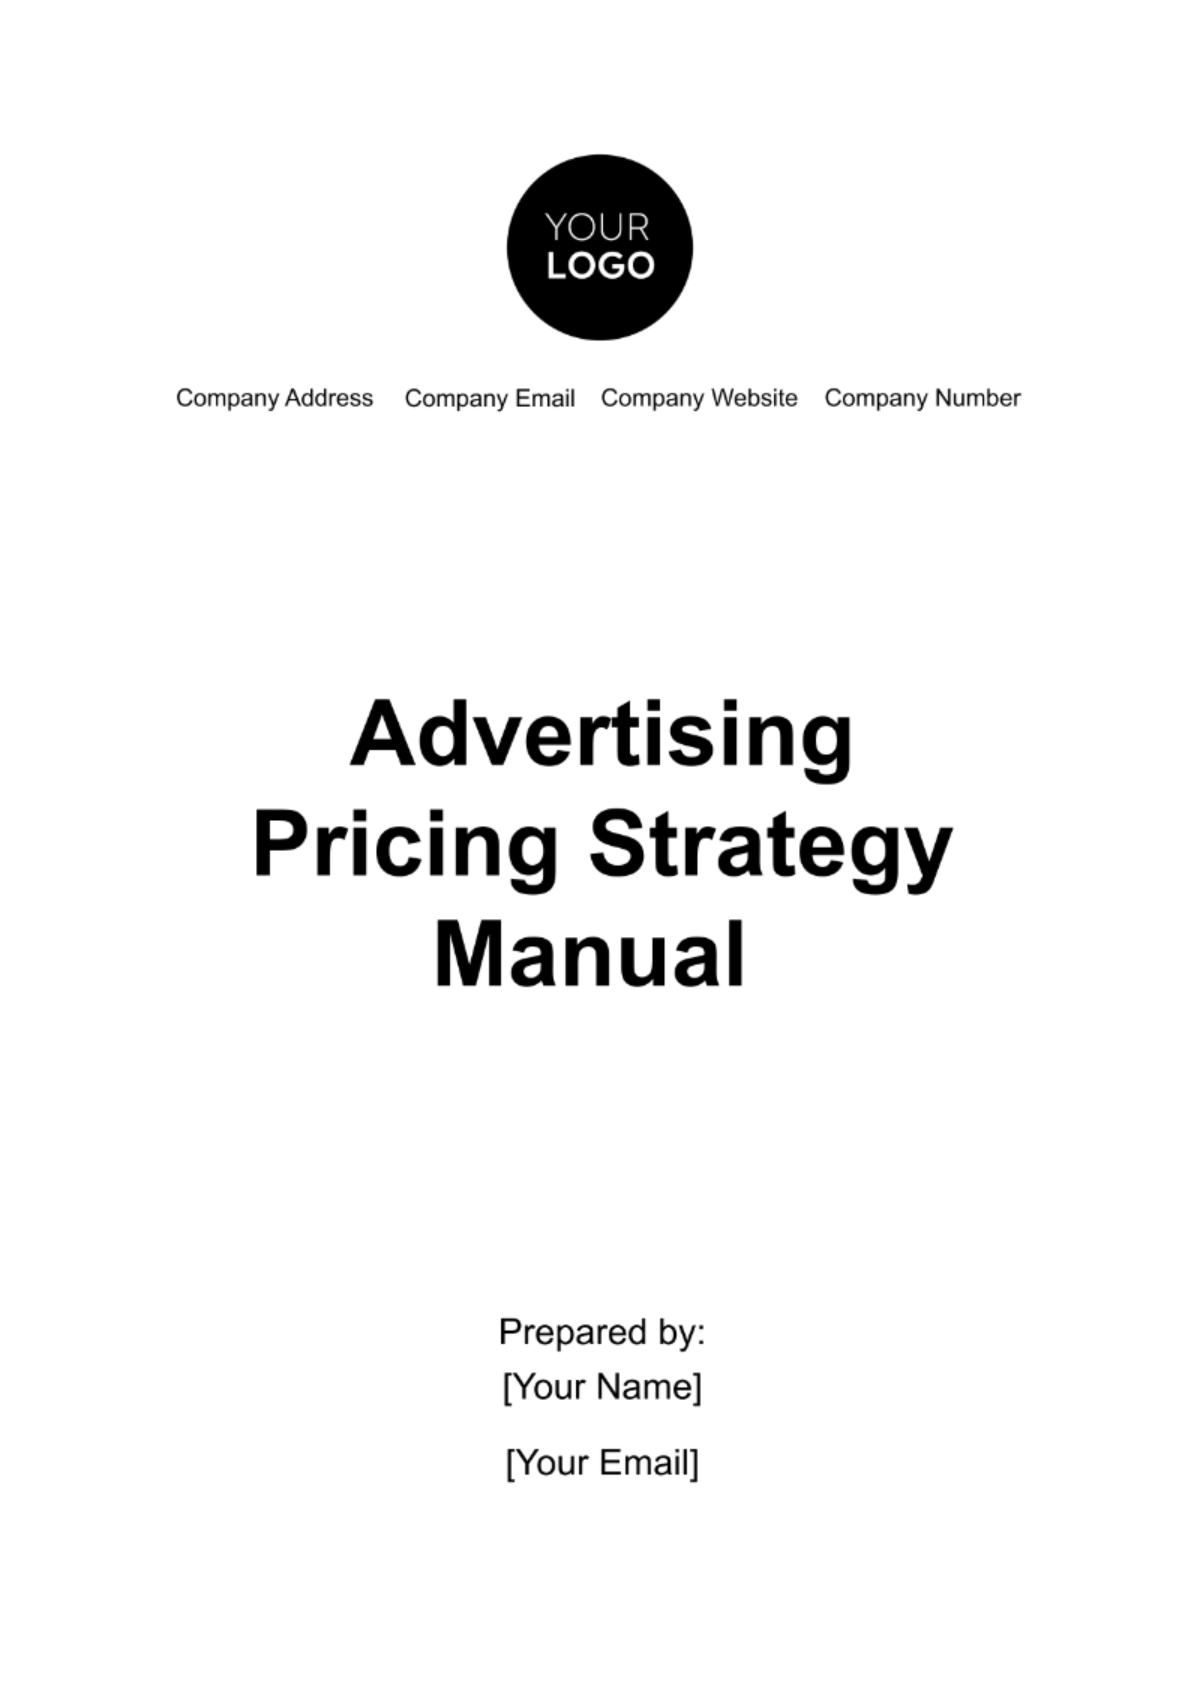 Advertising Pricing Strategy Manual Template